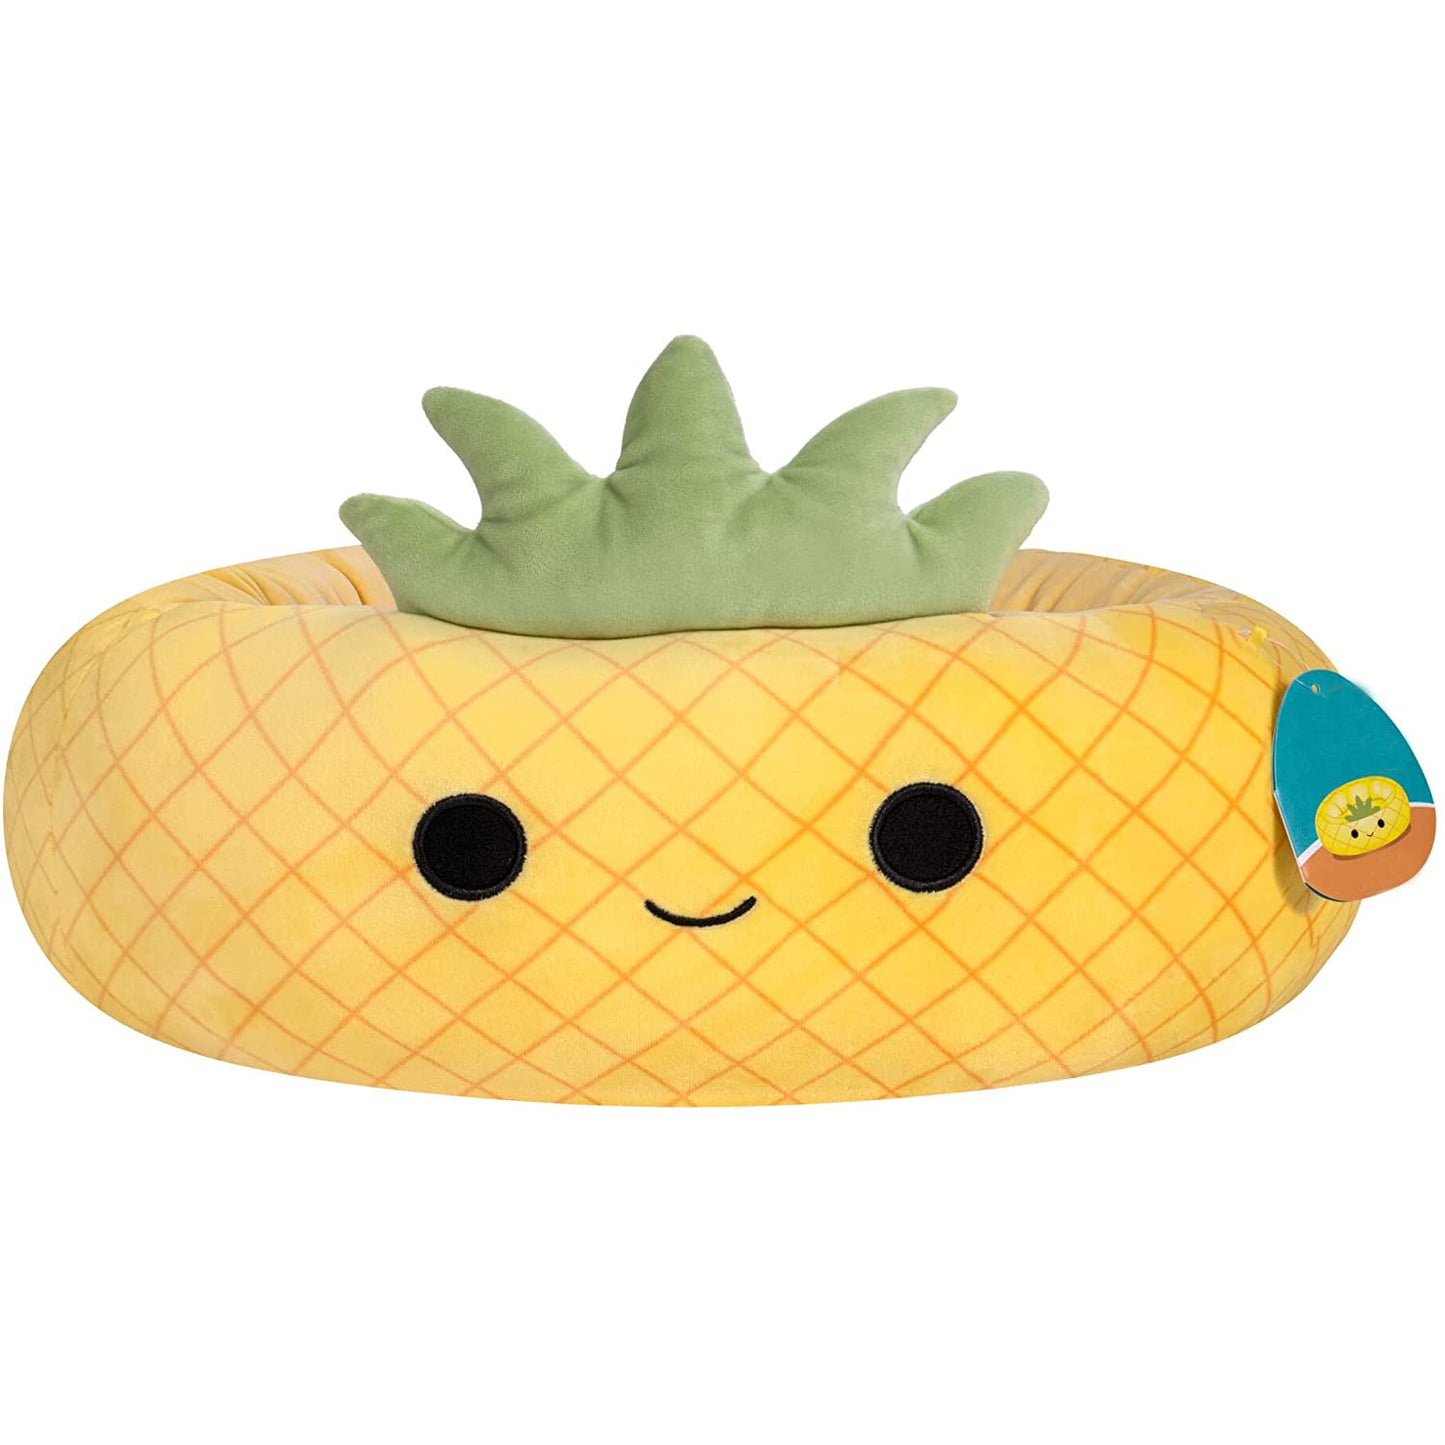 Pineapple Cat & Dog Bed